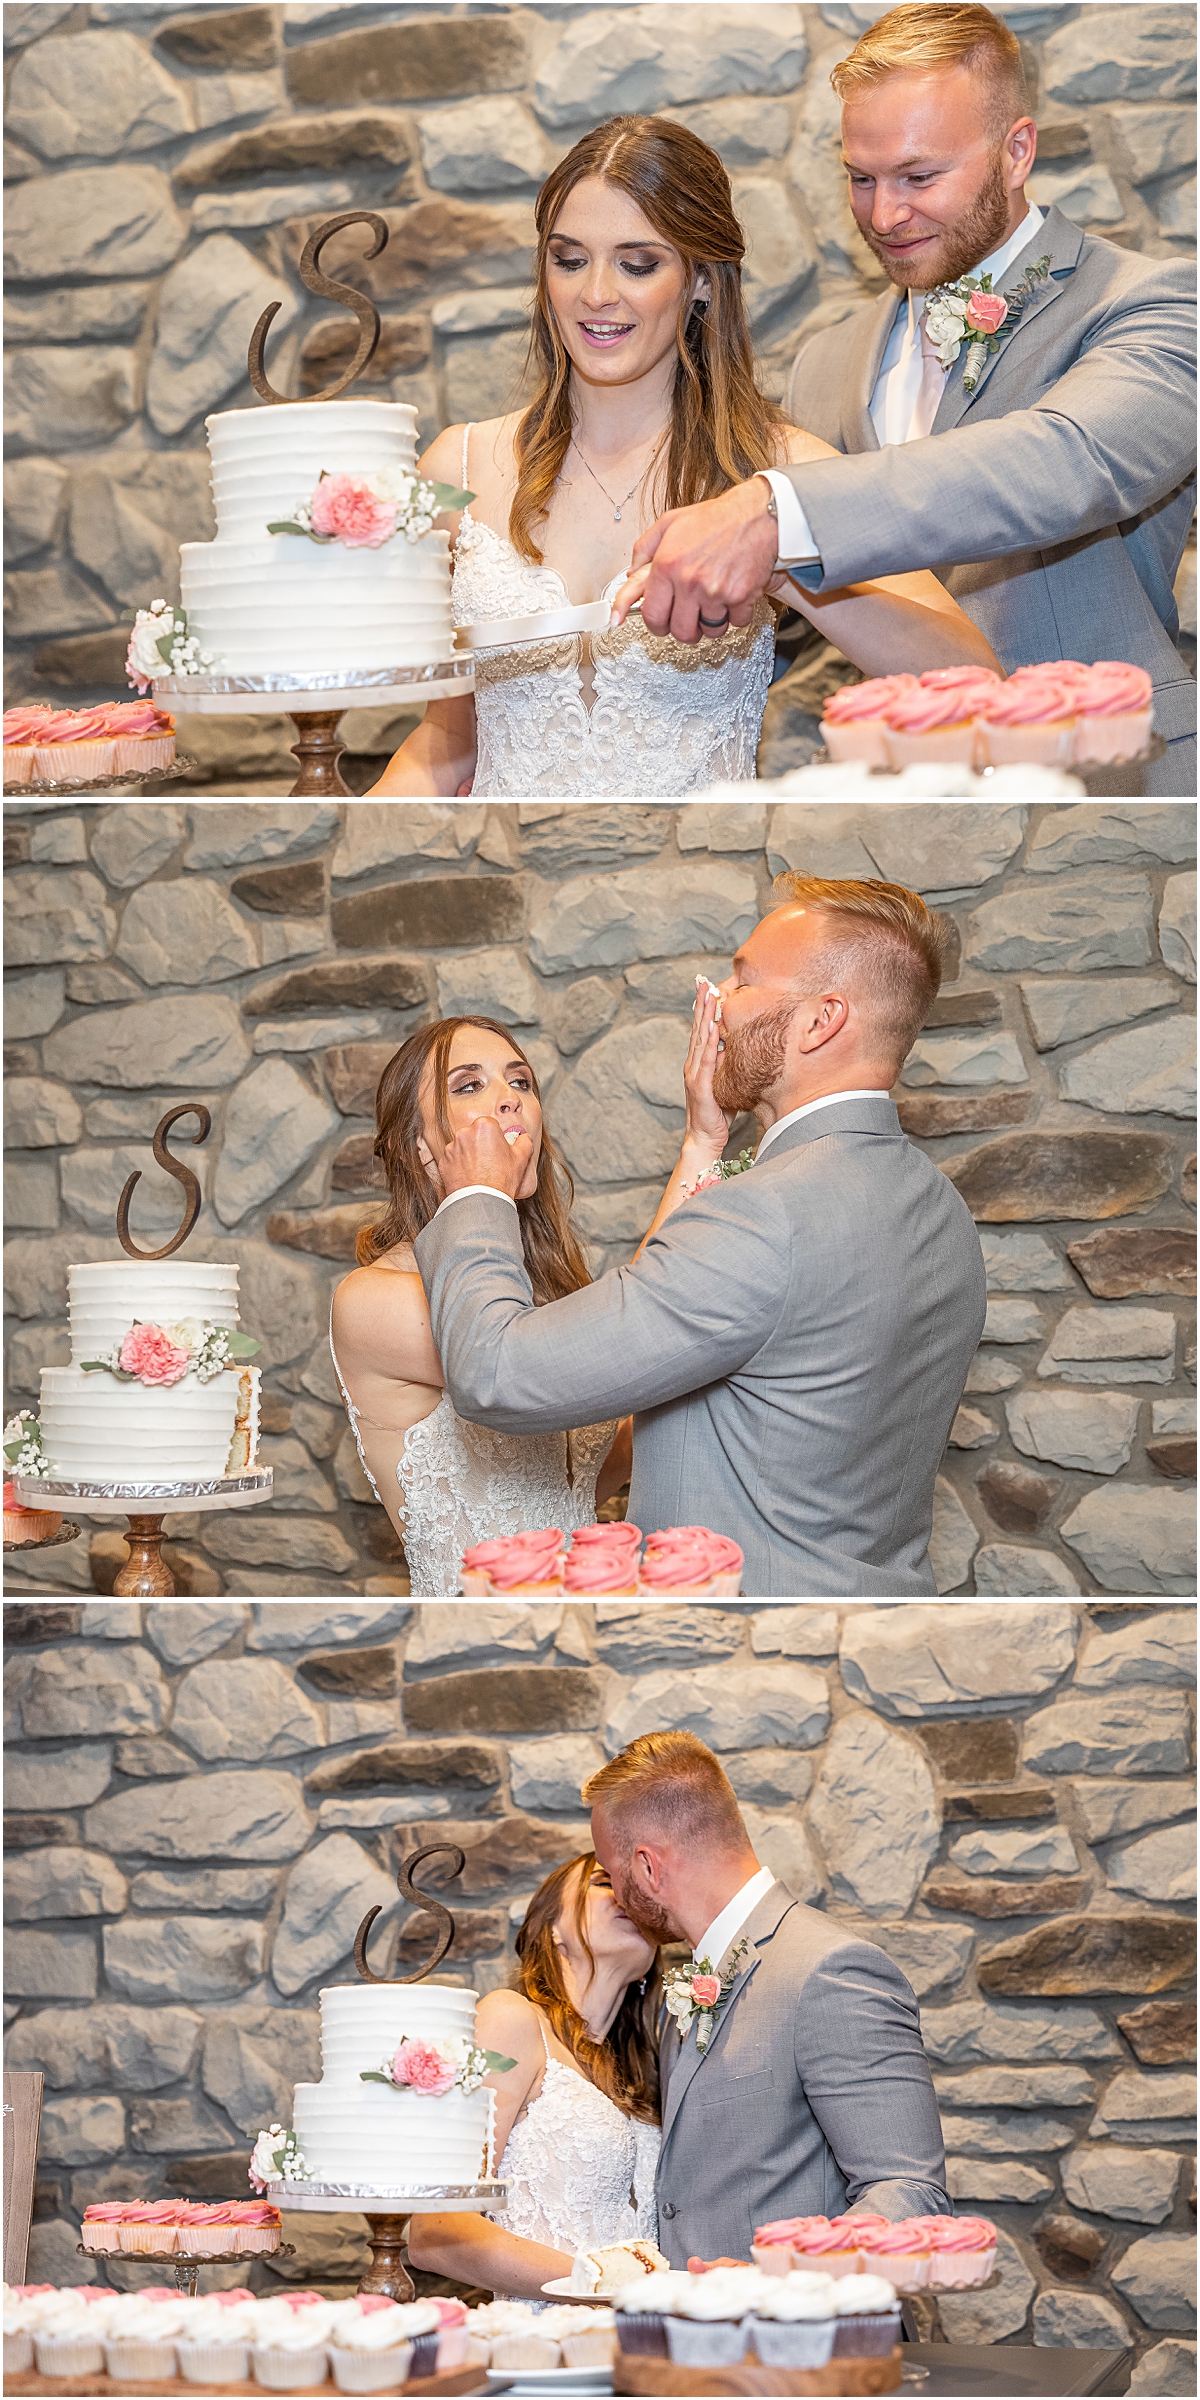 Collage of Ashleigh and Zach cutting the cake